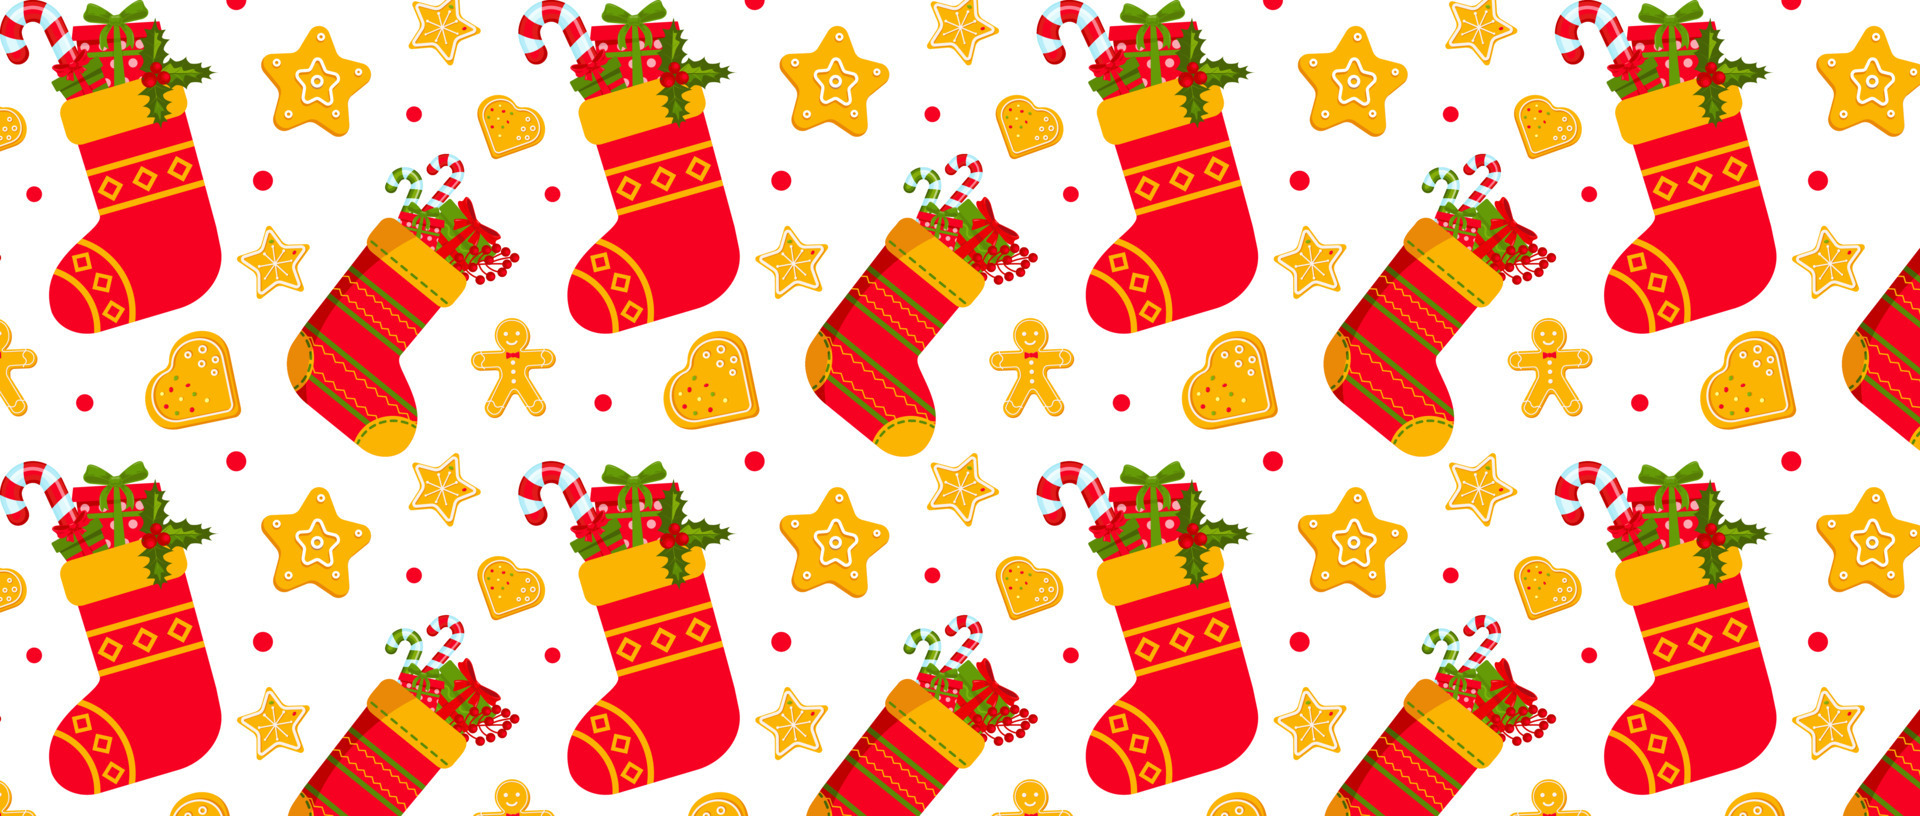 Christmas socks with gifts, white background. Seamless pattern for ...